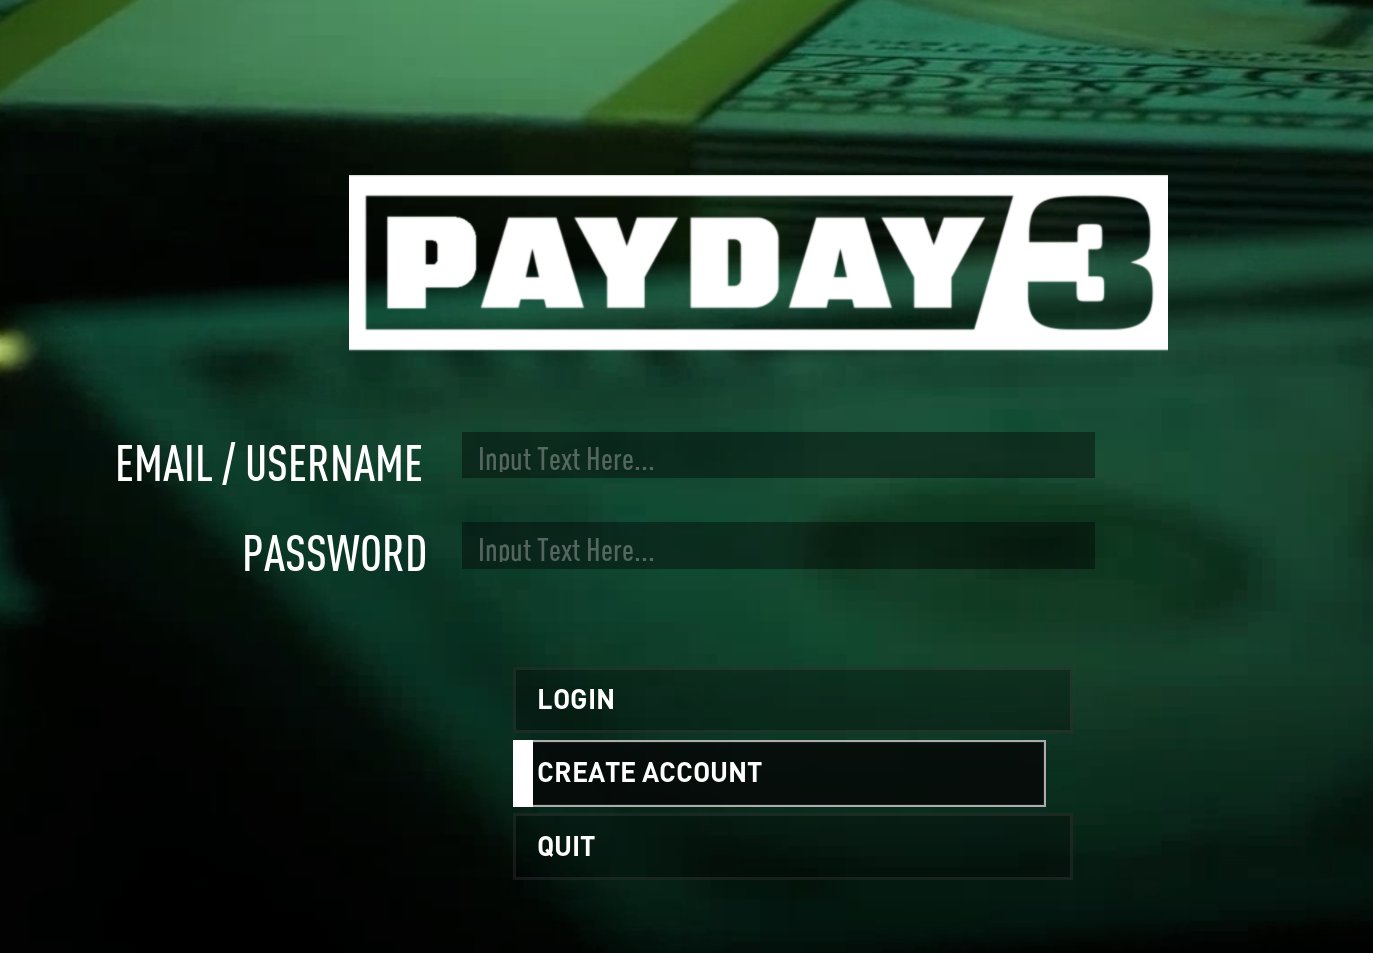 MeovvCAT on X: Always-online authentication in Payday 3 + Denuvo